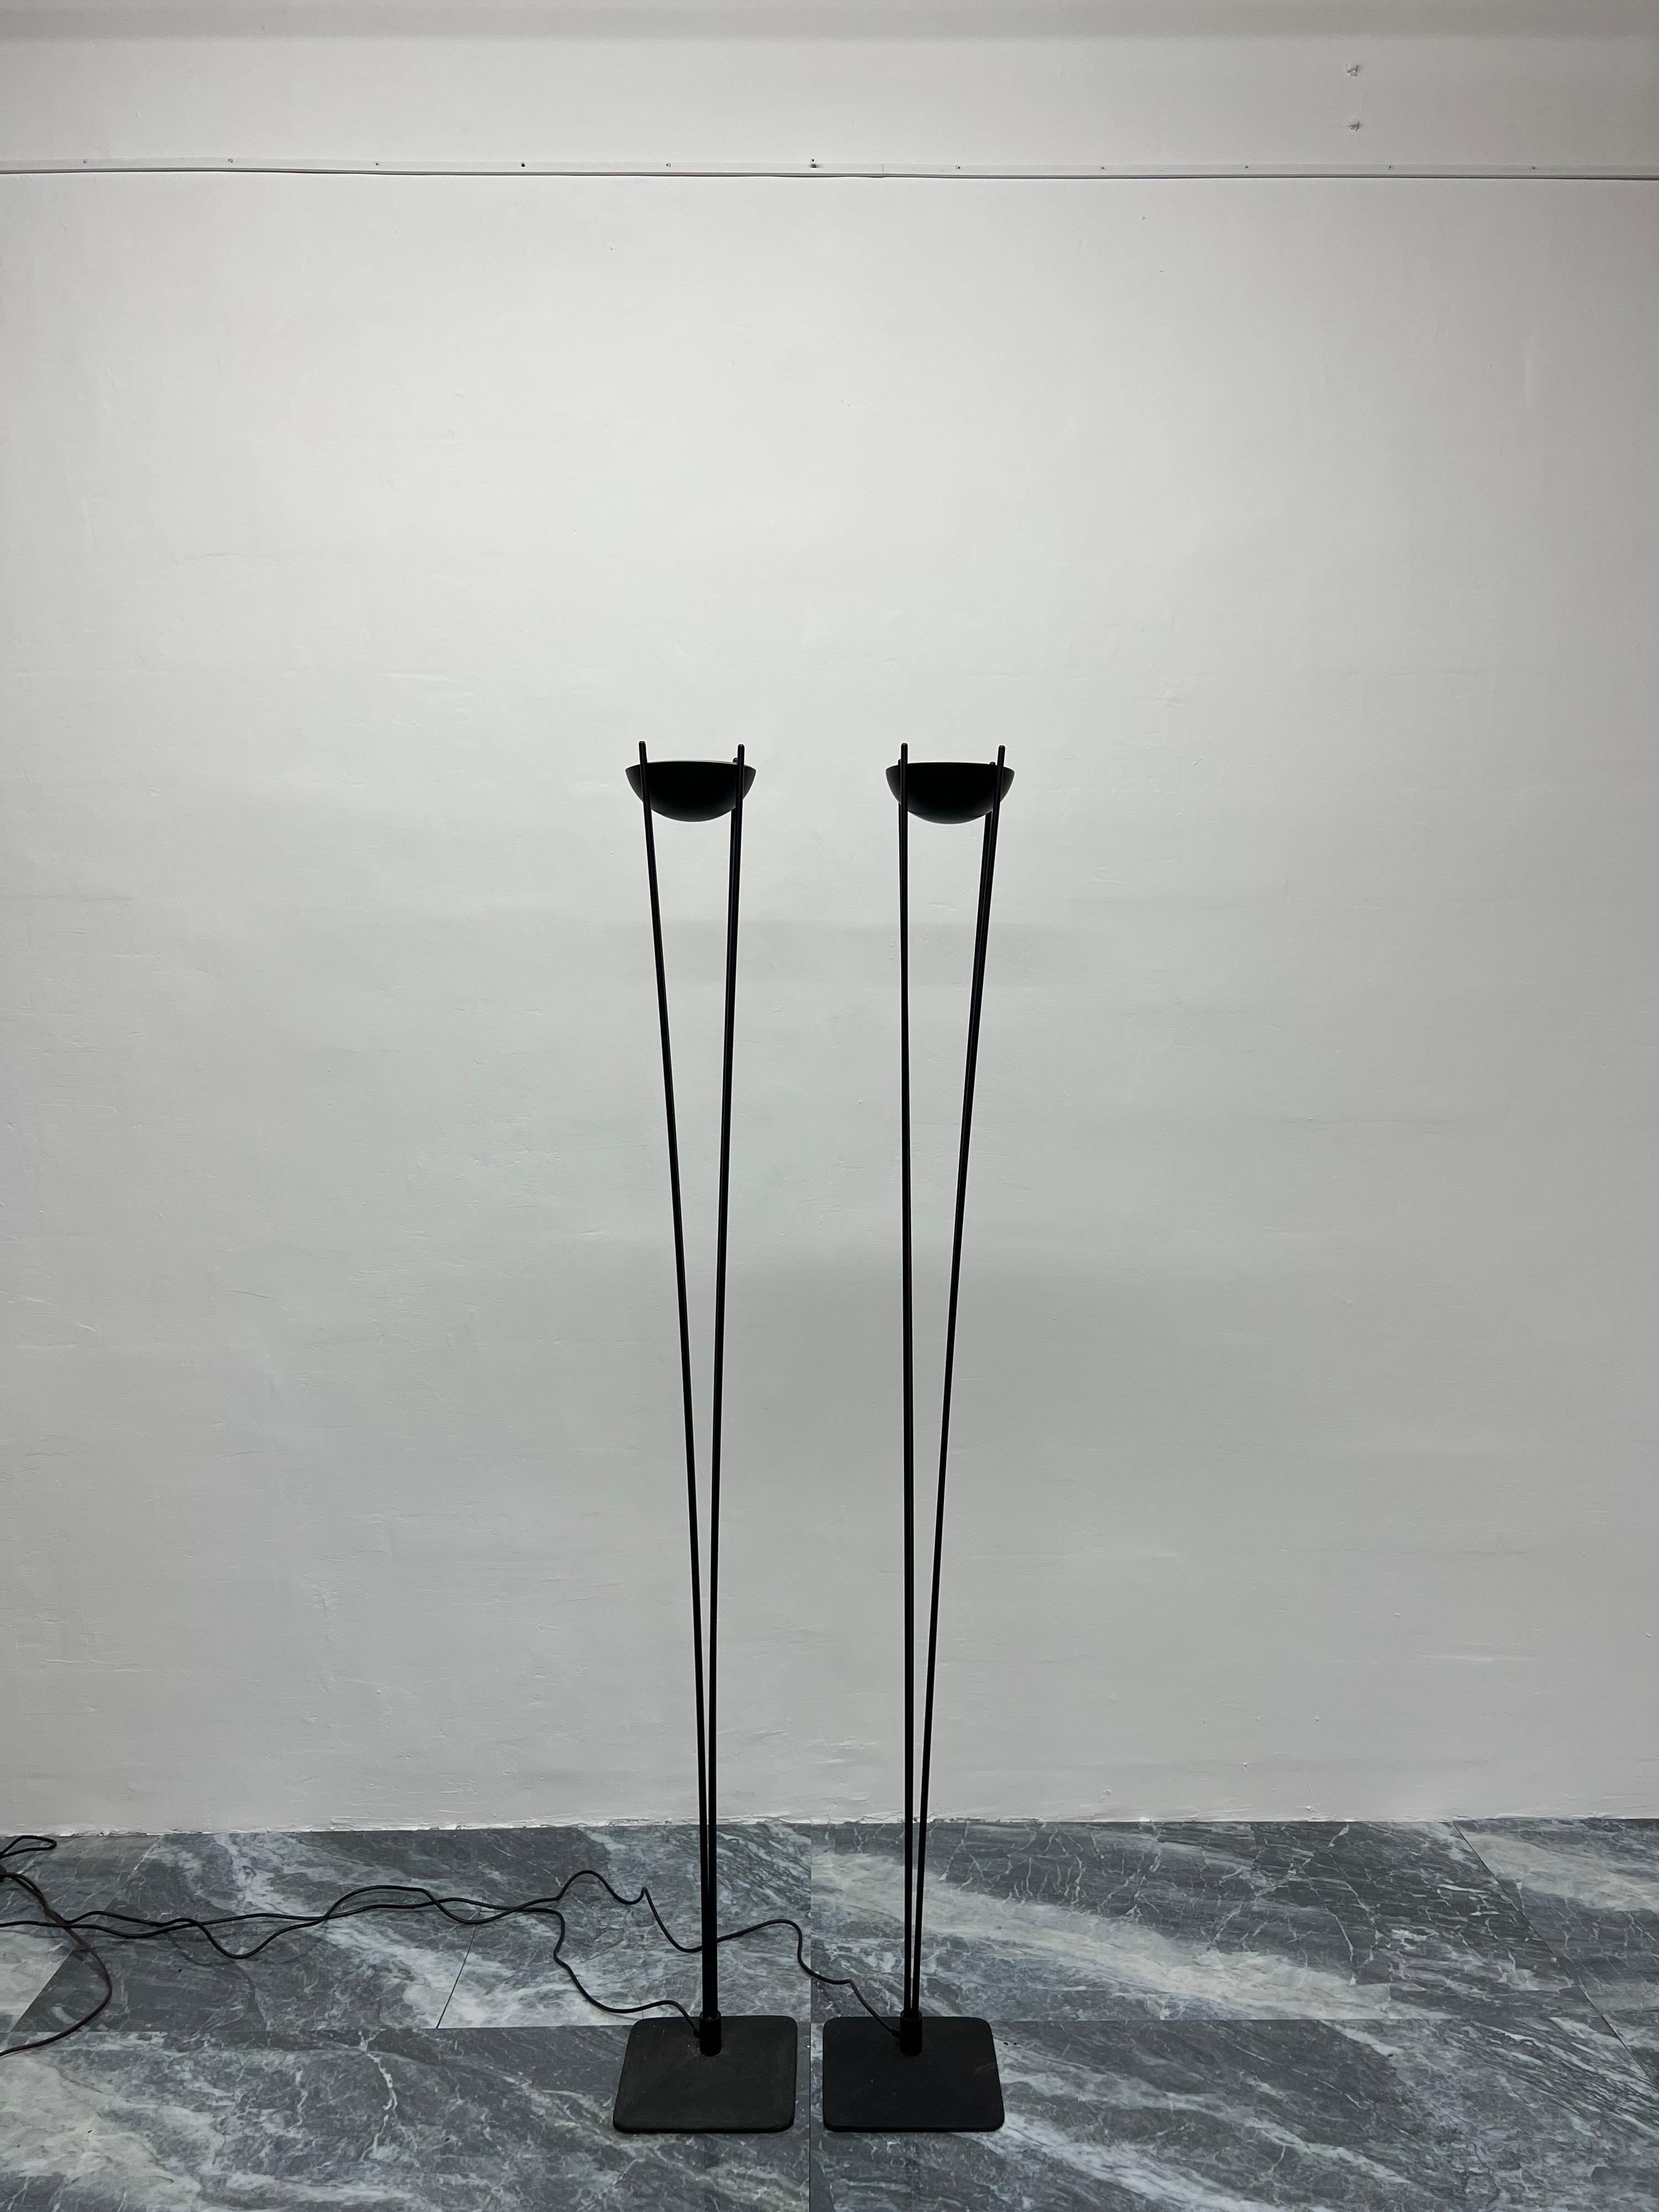 Postmodern Koch & Lowy Matte Black Torchiere Floor Lamps, 1980s, a Pair For Sale 3